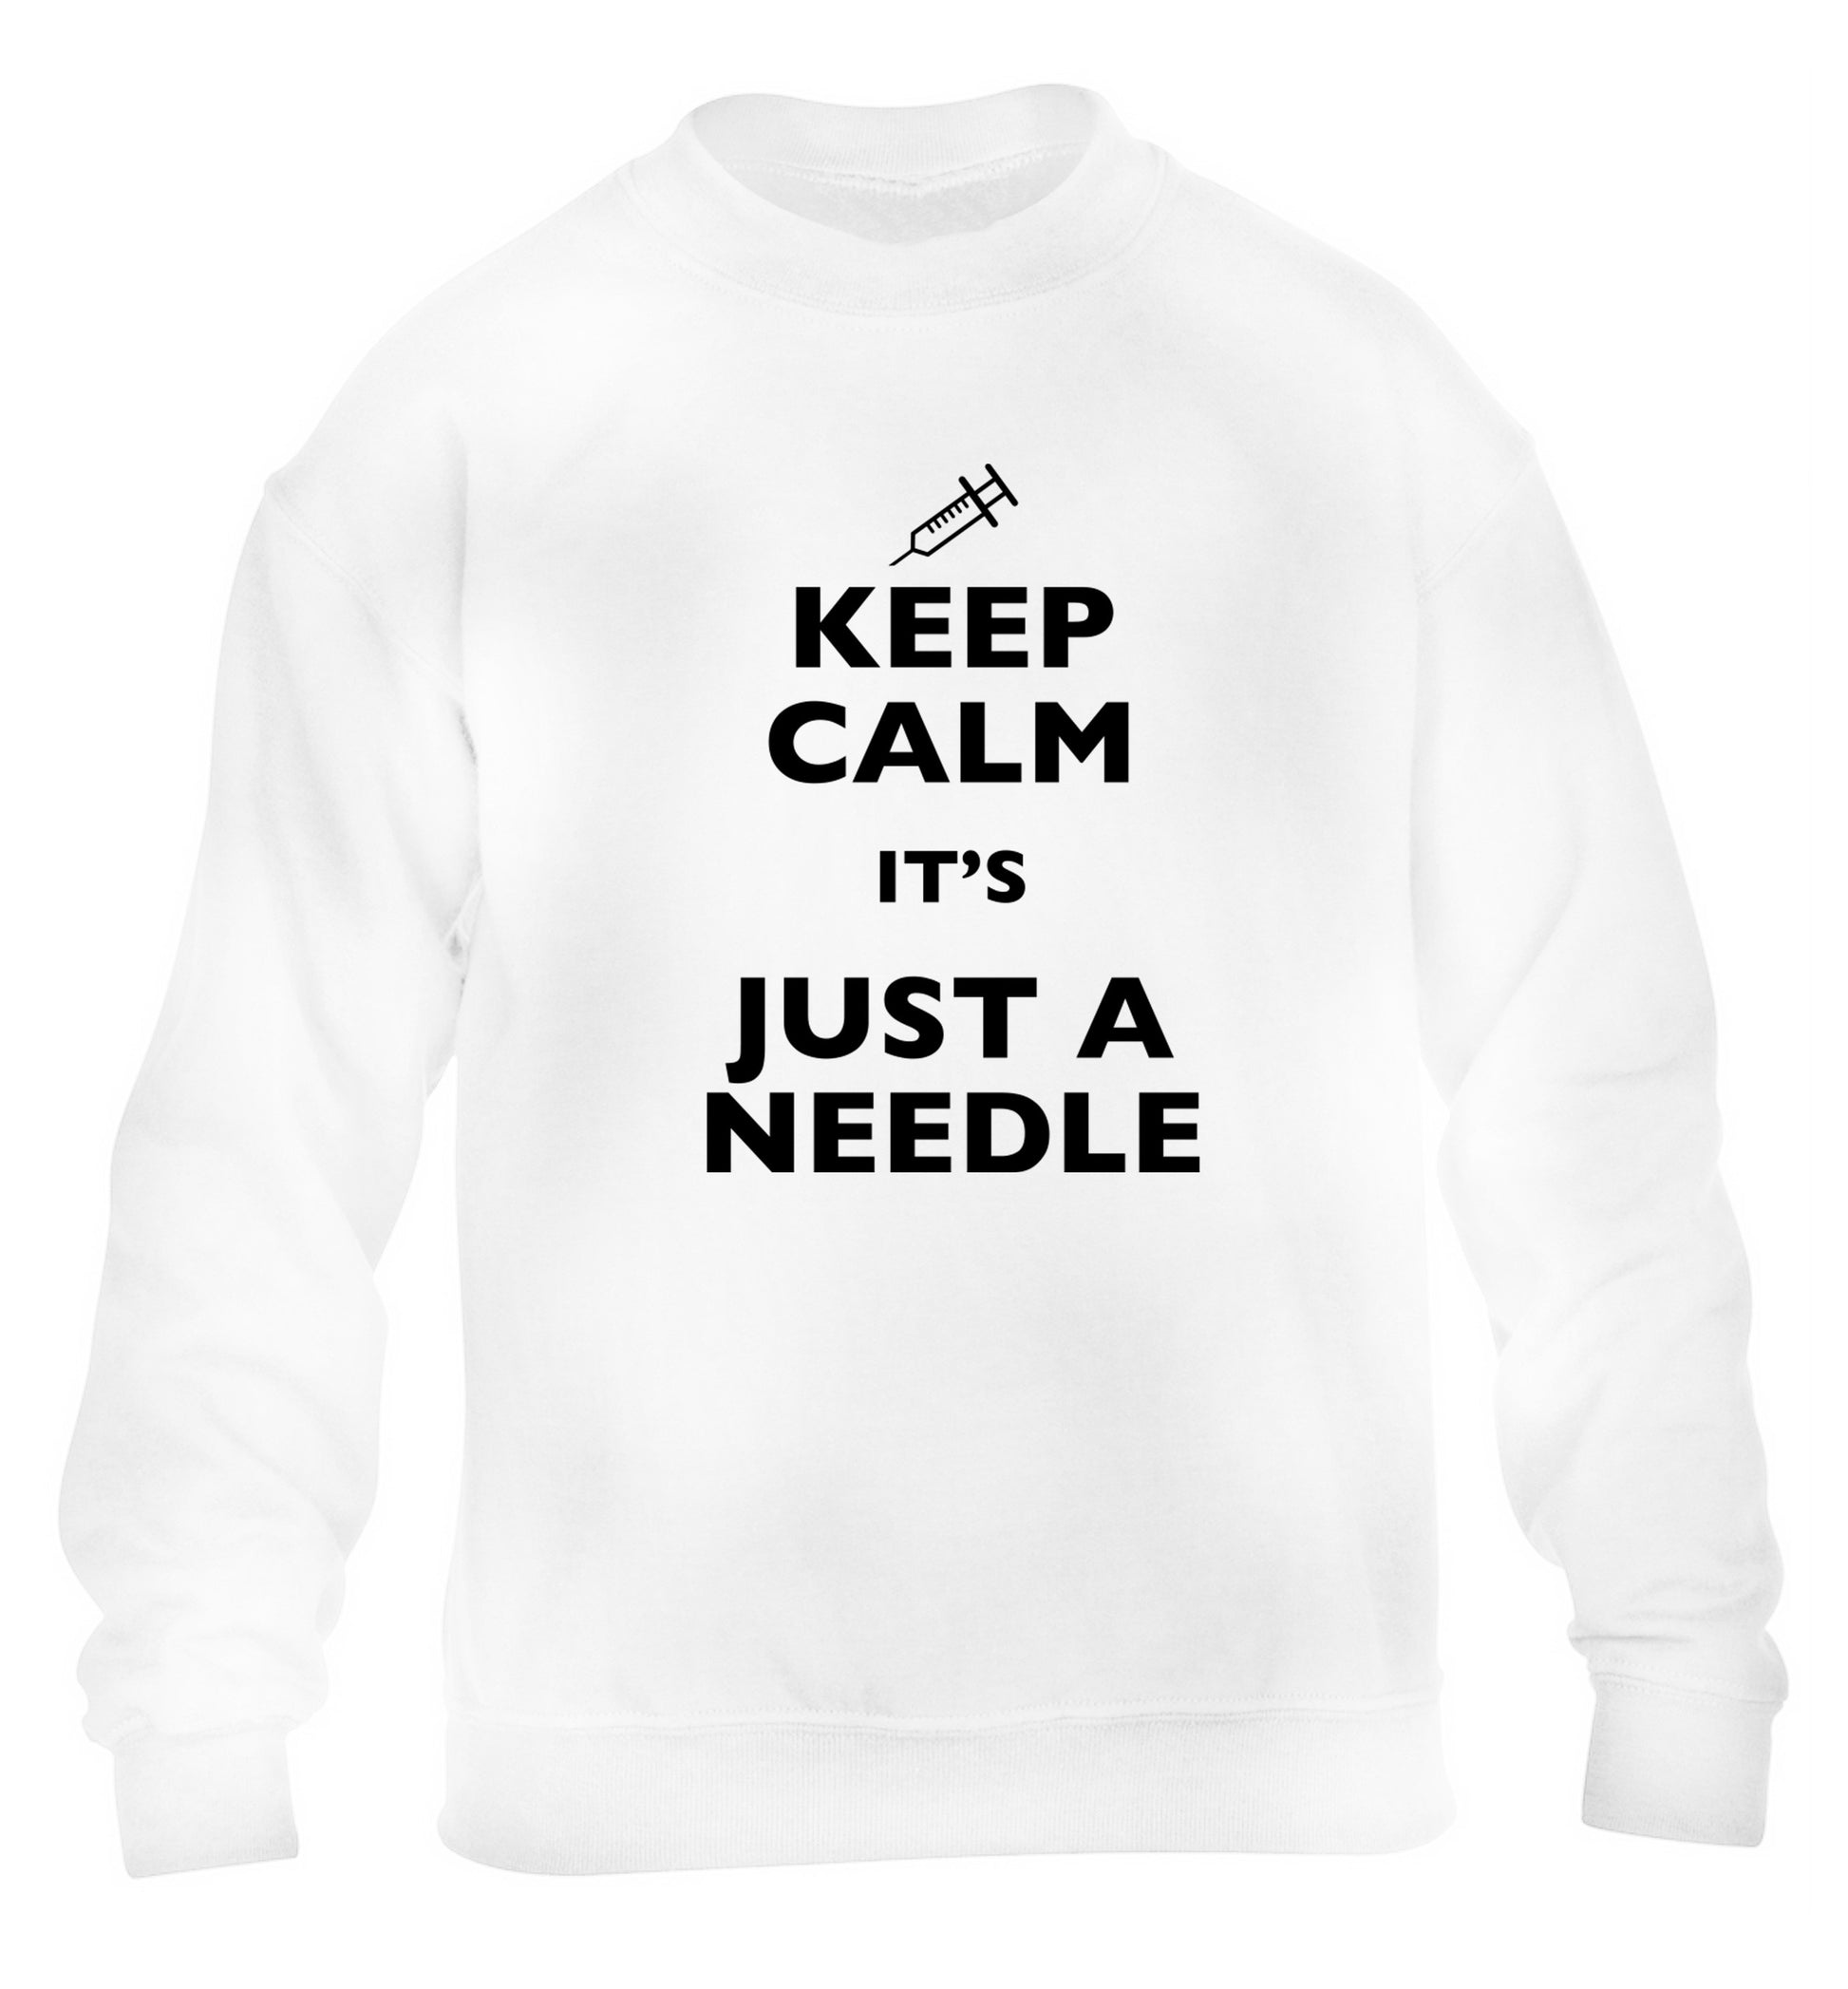 Keep calm it's only a needle children's white sweater 12-14 Years